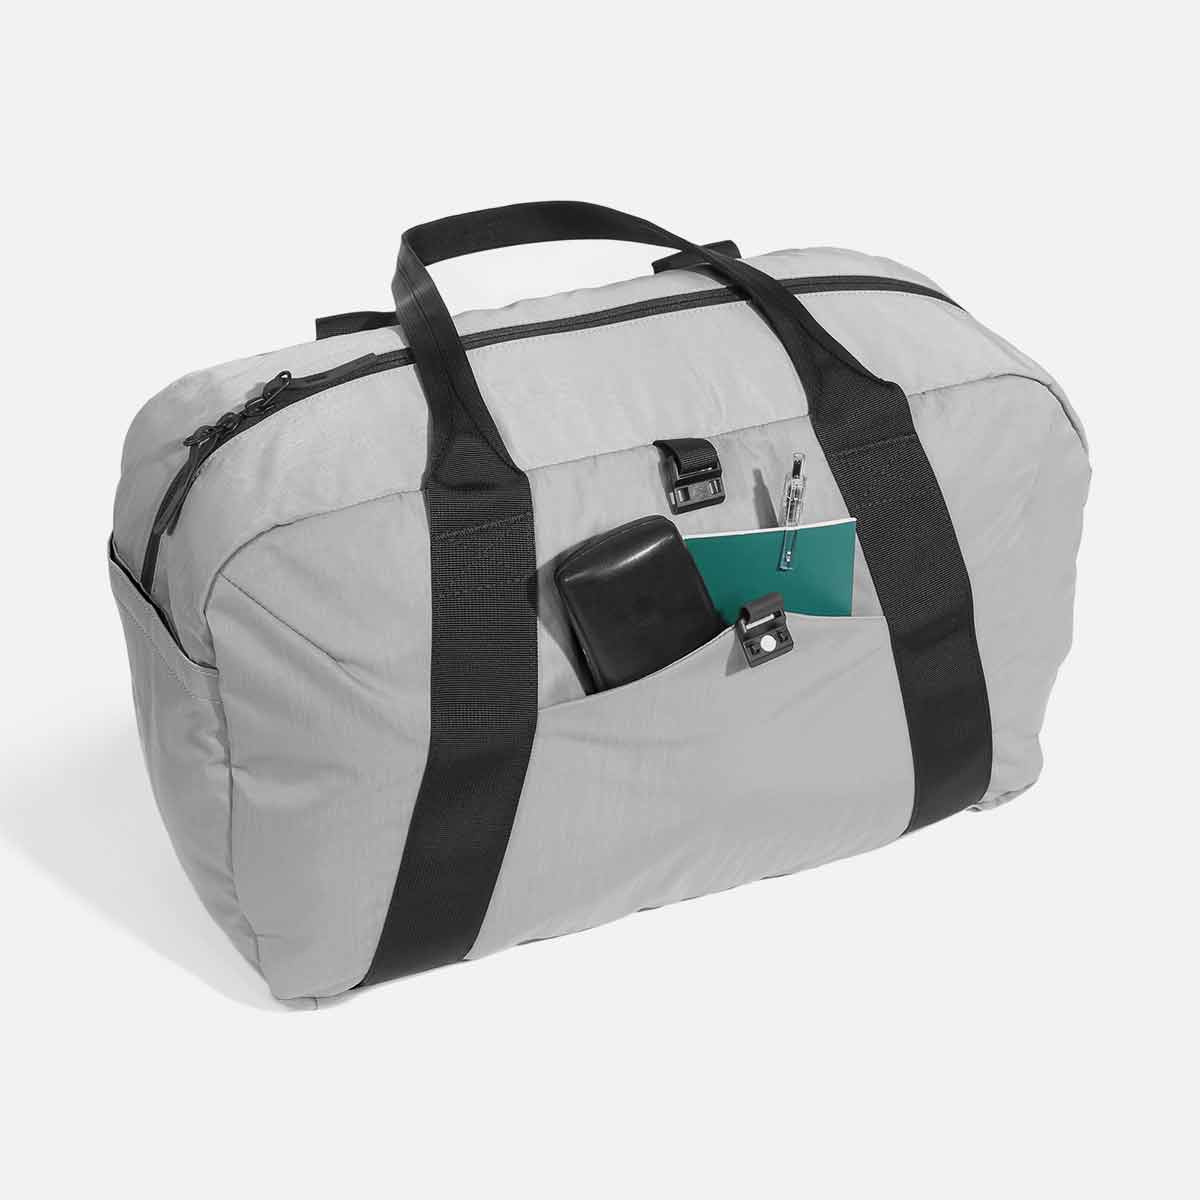 Go Duffel 2 Gray | Aer ｜ エアー公式通販サイト